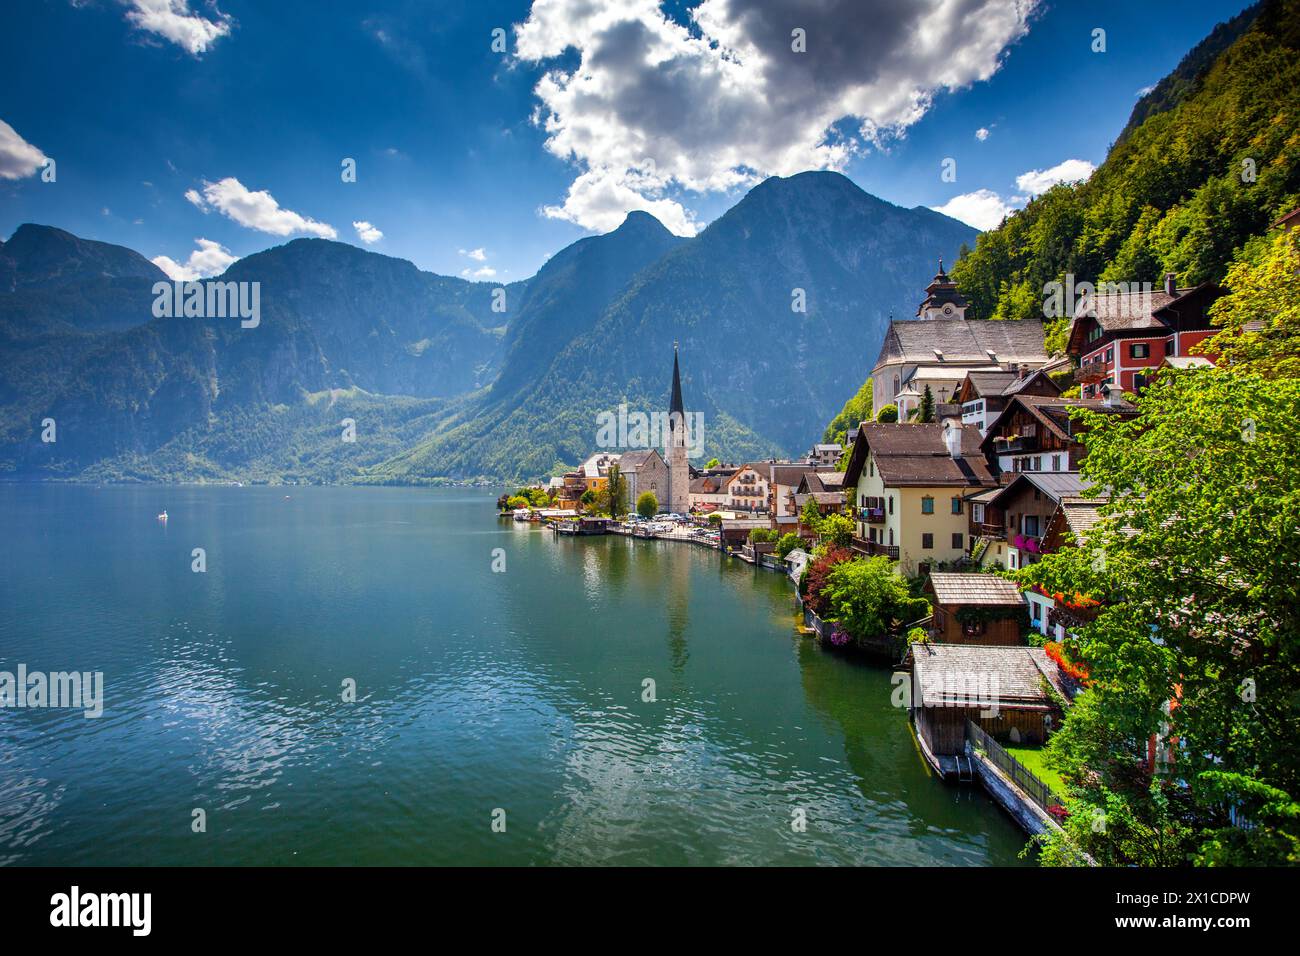 Hallstatt village by the lake with alpine mountains and clear skies Stock Photo